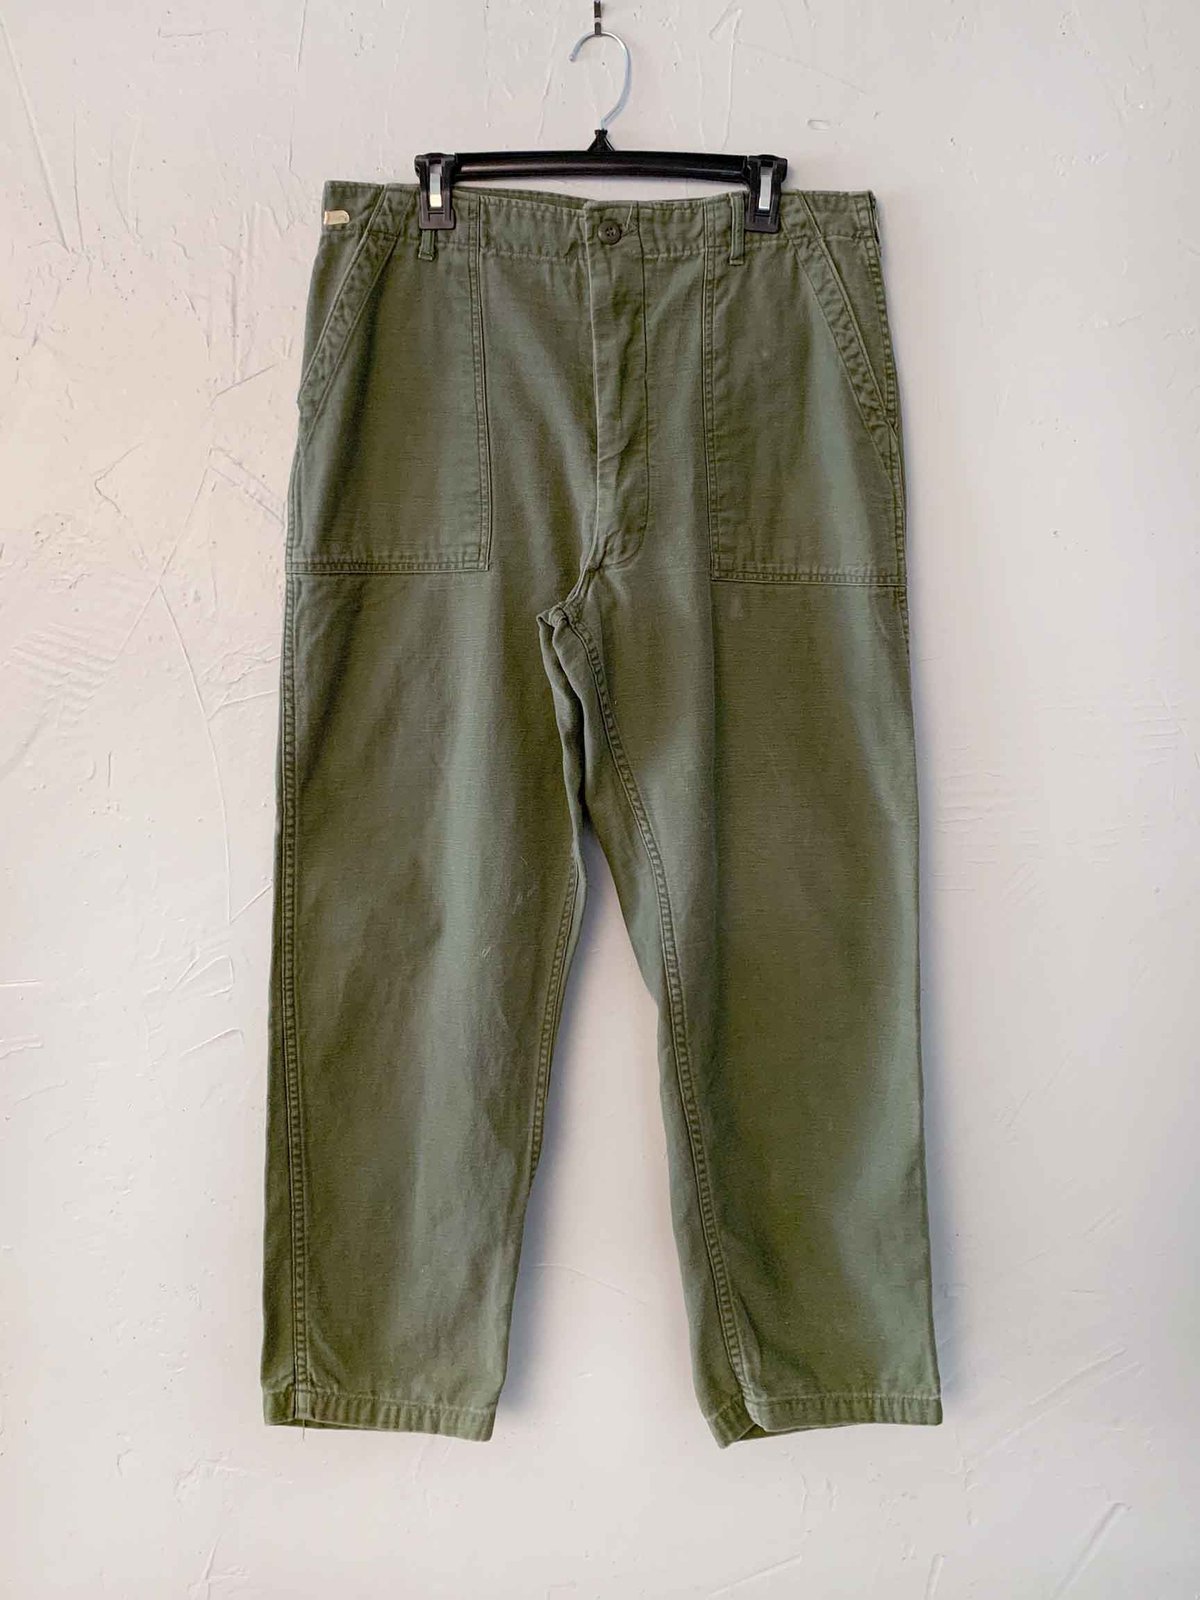 NISH | Vintage '70s US Army OG-107 Military Utility Trousers